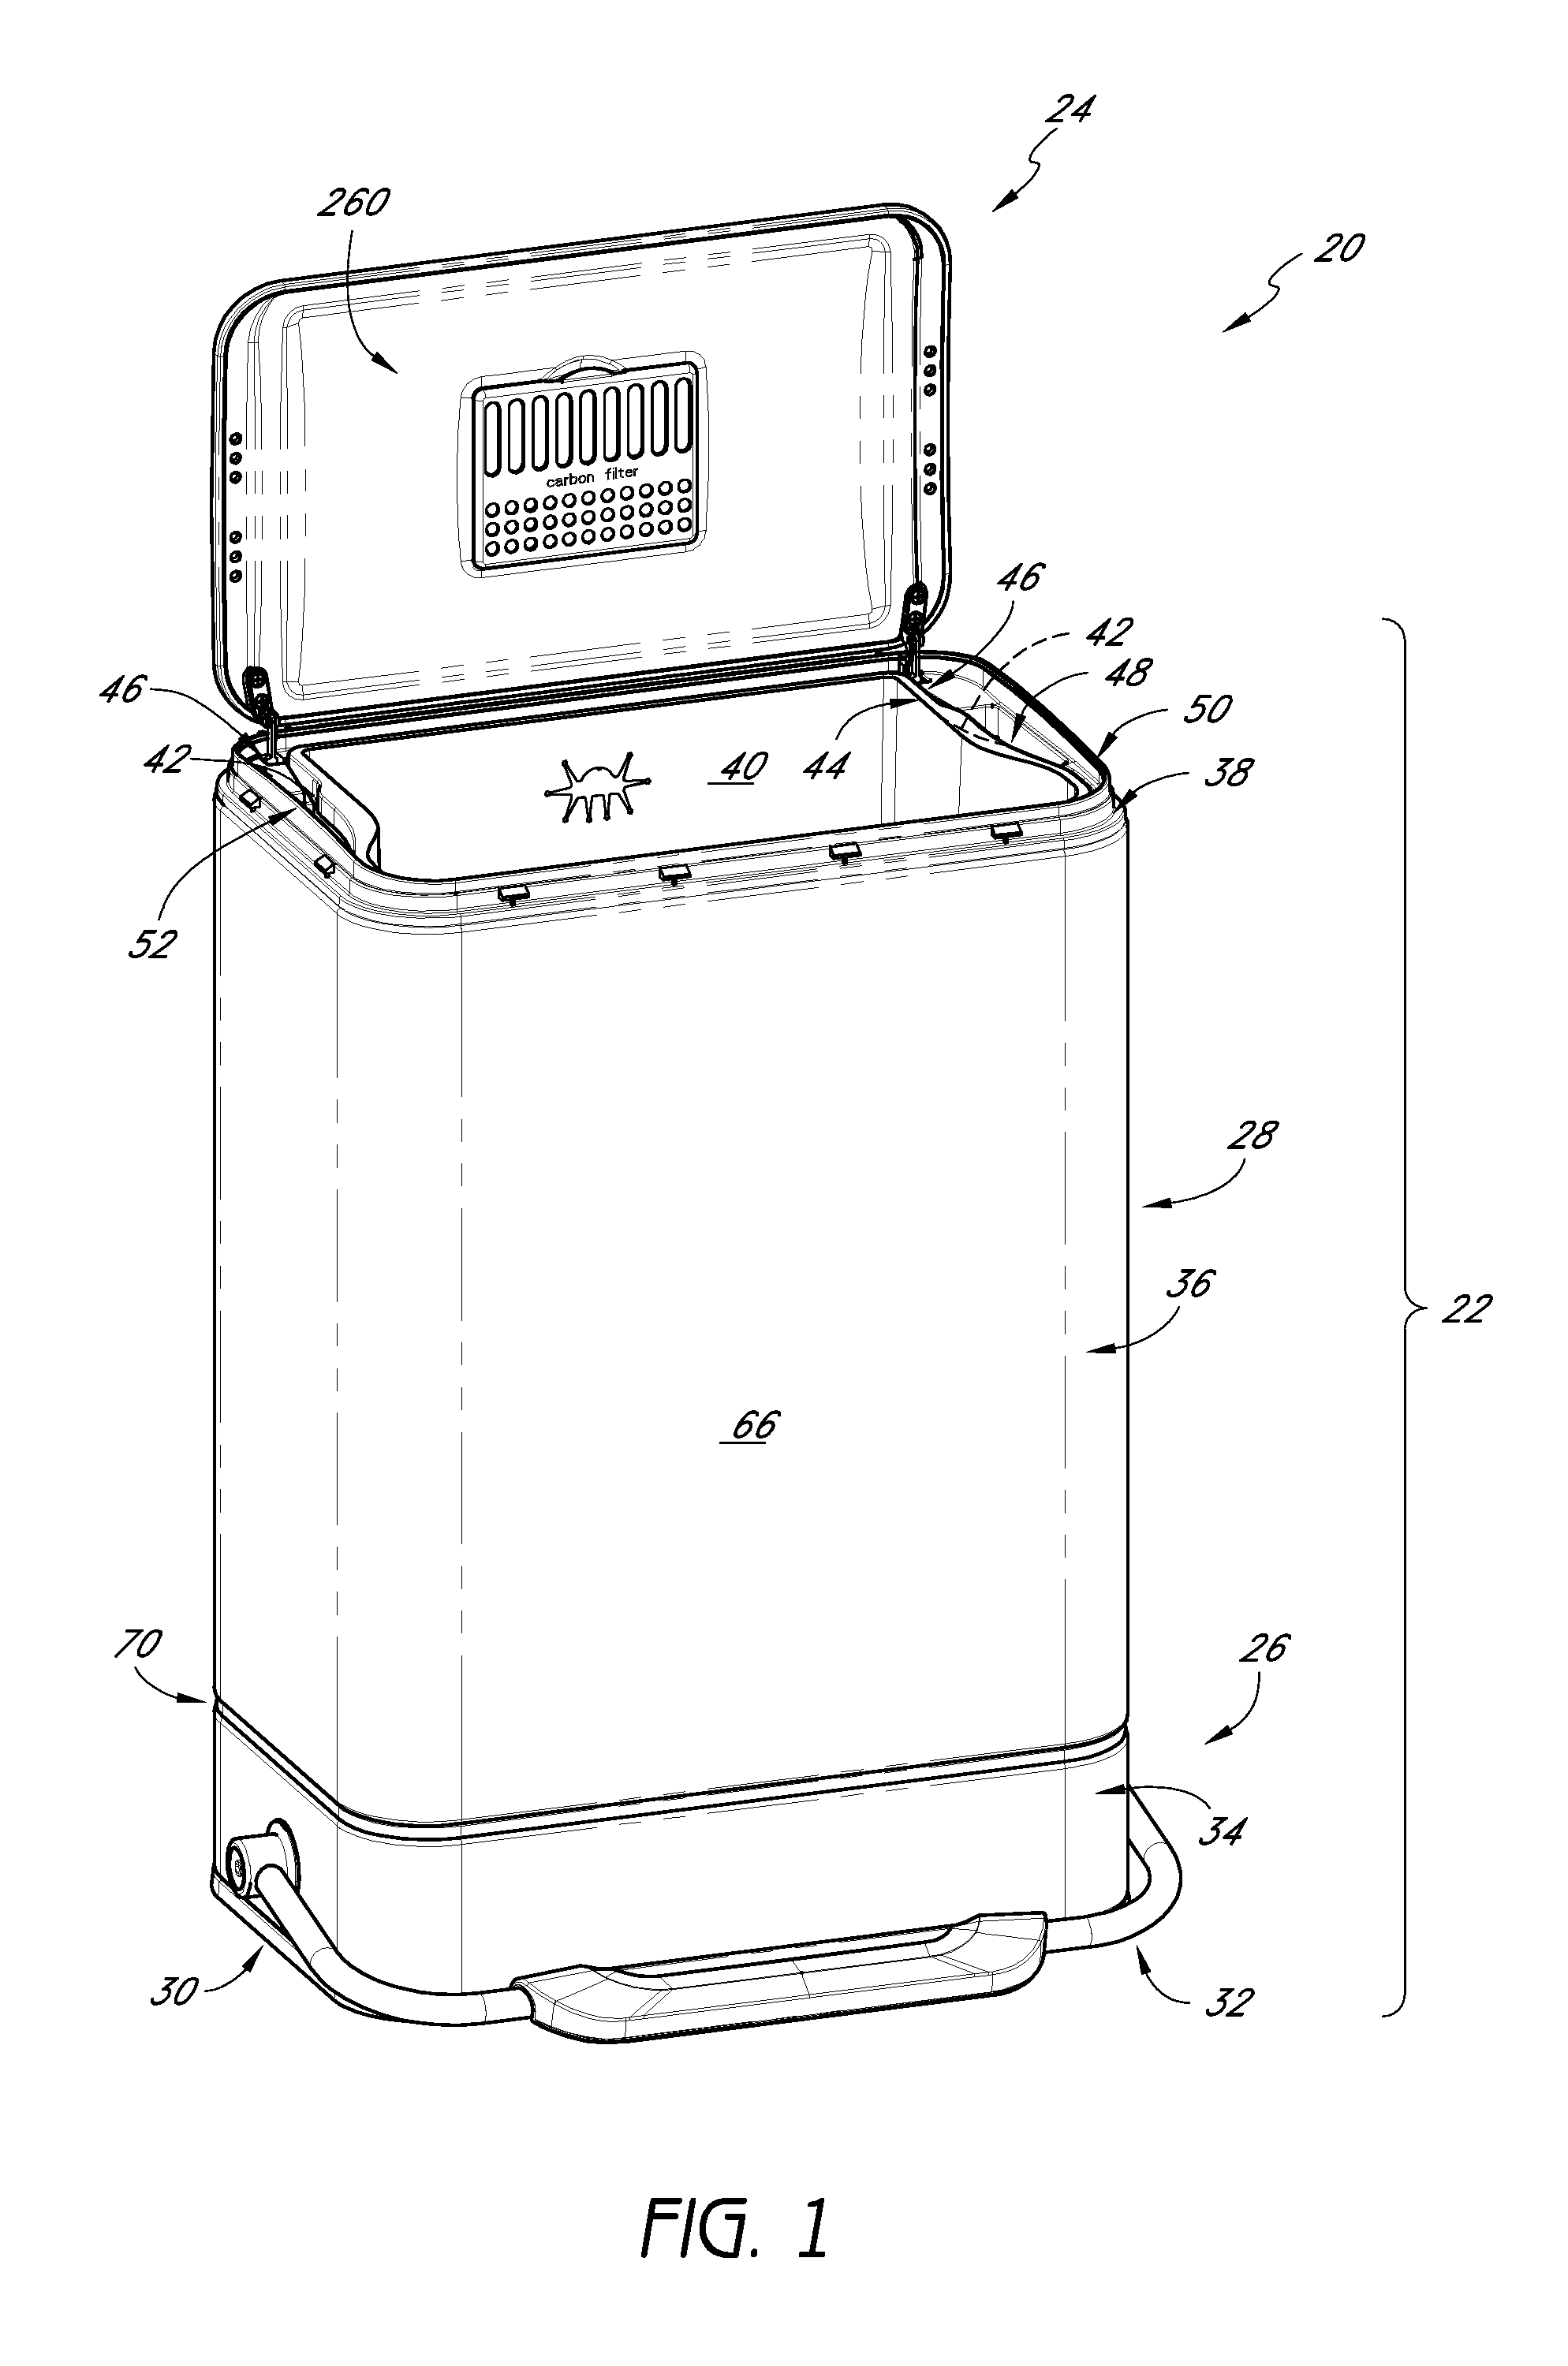 Receptacle with motion dampers for lid and air filtration device